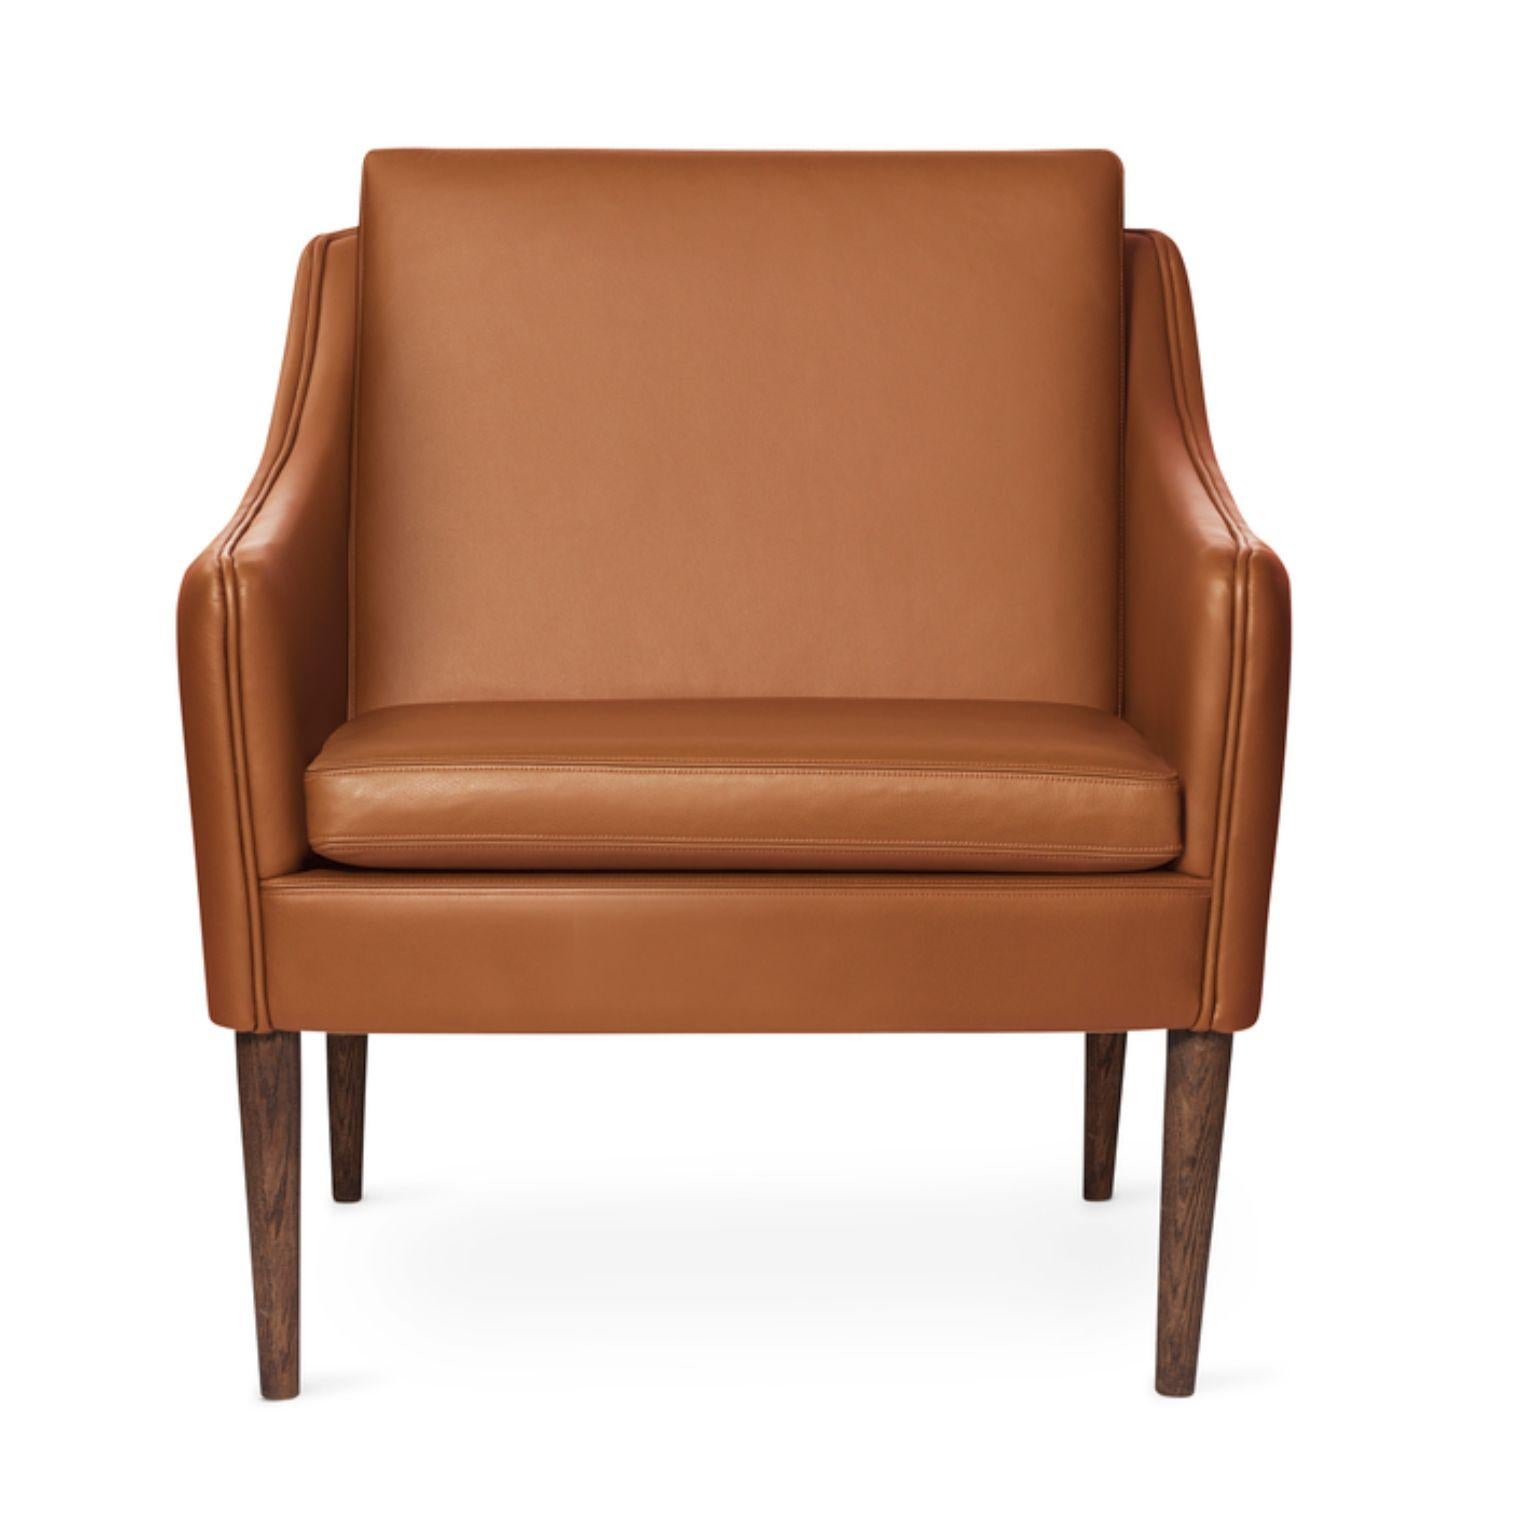 Mr. Olsen lounge chair silk solid smoked oak camel by Warm Nordic
Dimensions: D 81 x W79 x H 78 cm
Material: Textile upholstery, foam, spring system, oak, silk
Weight: 27 kg
Also available in different colours, materials and finishes.

A classic,